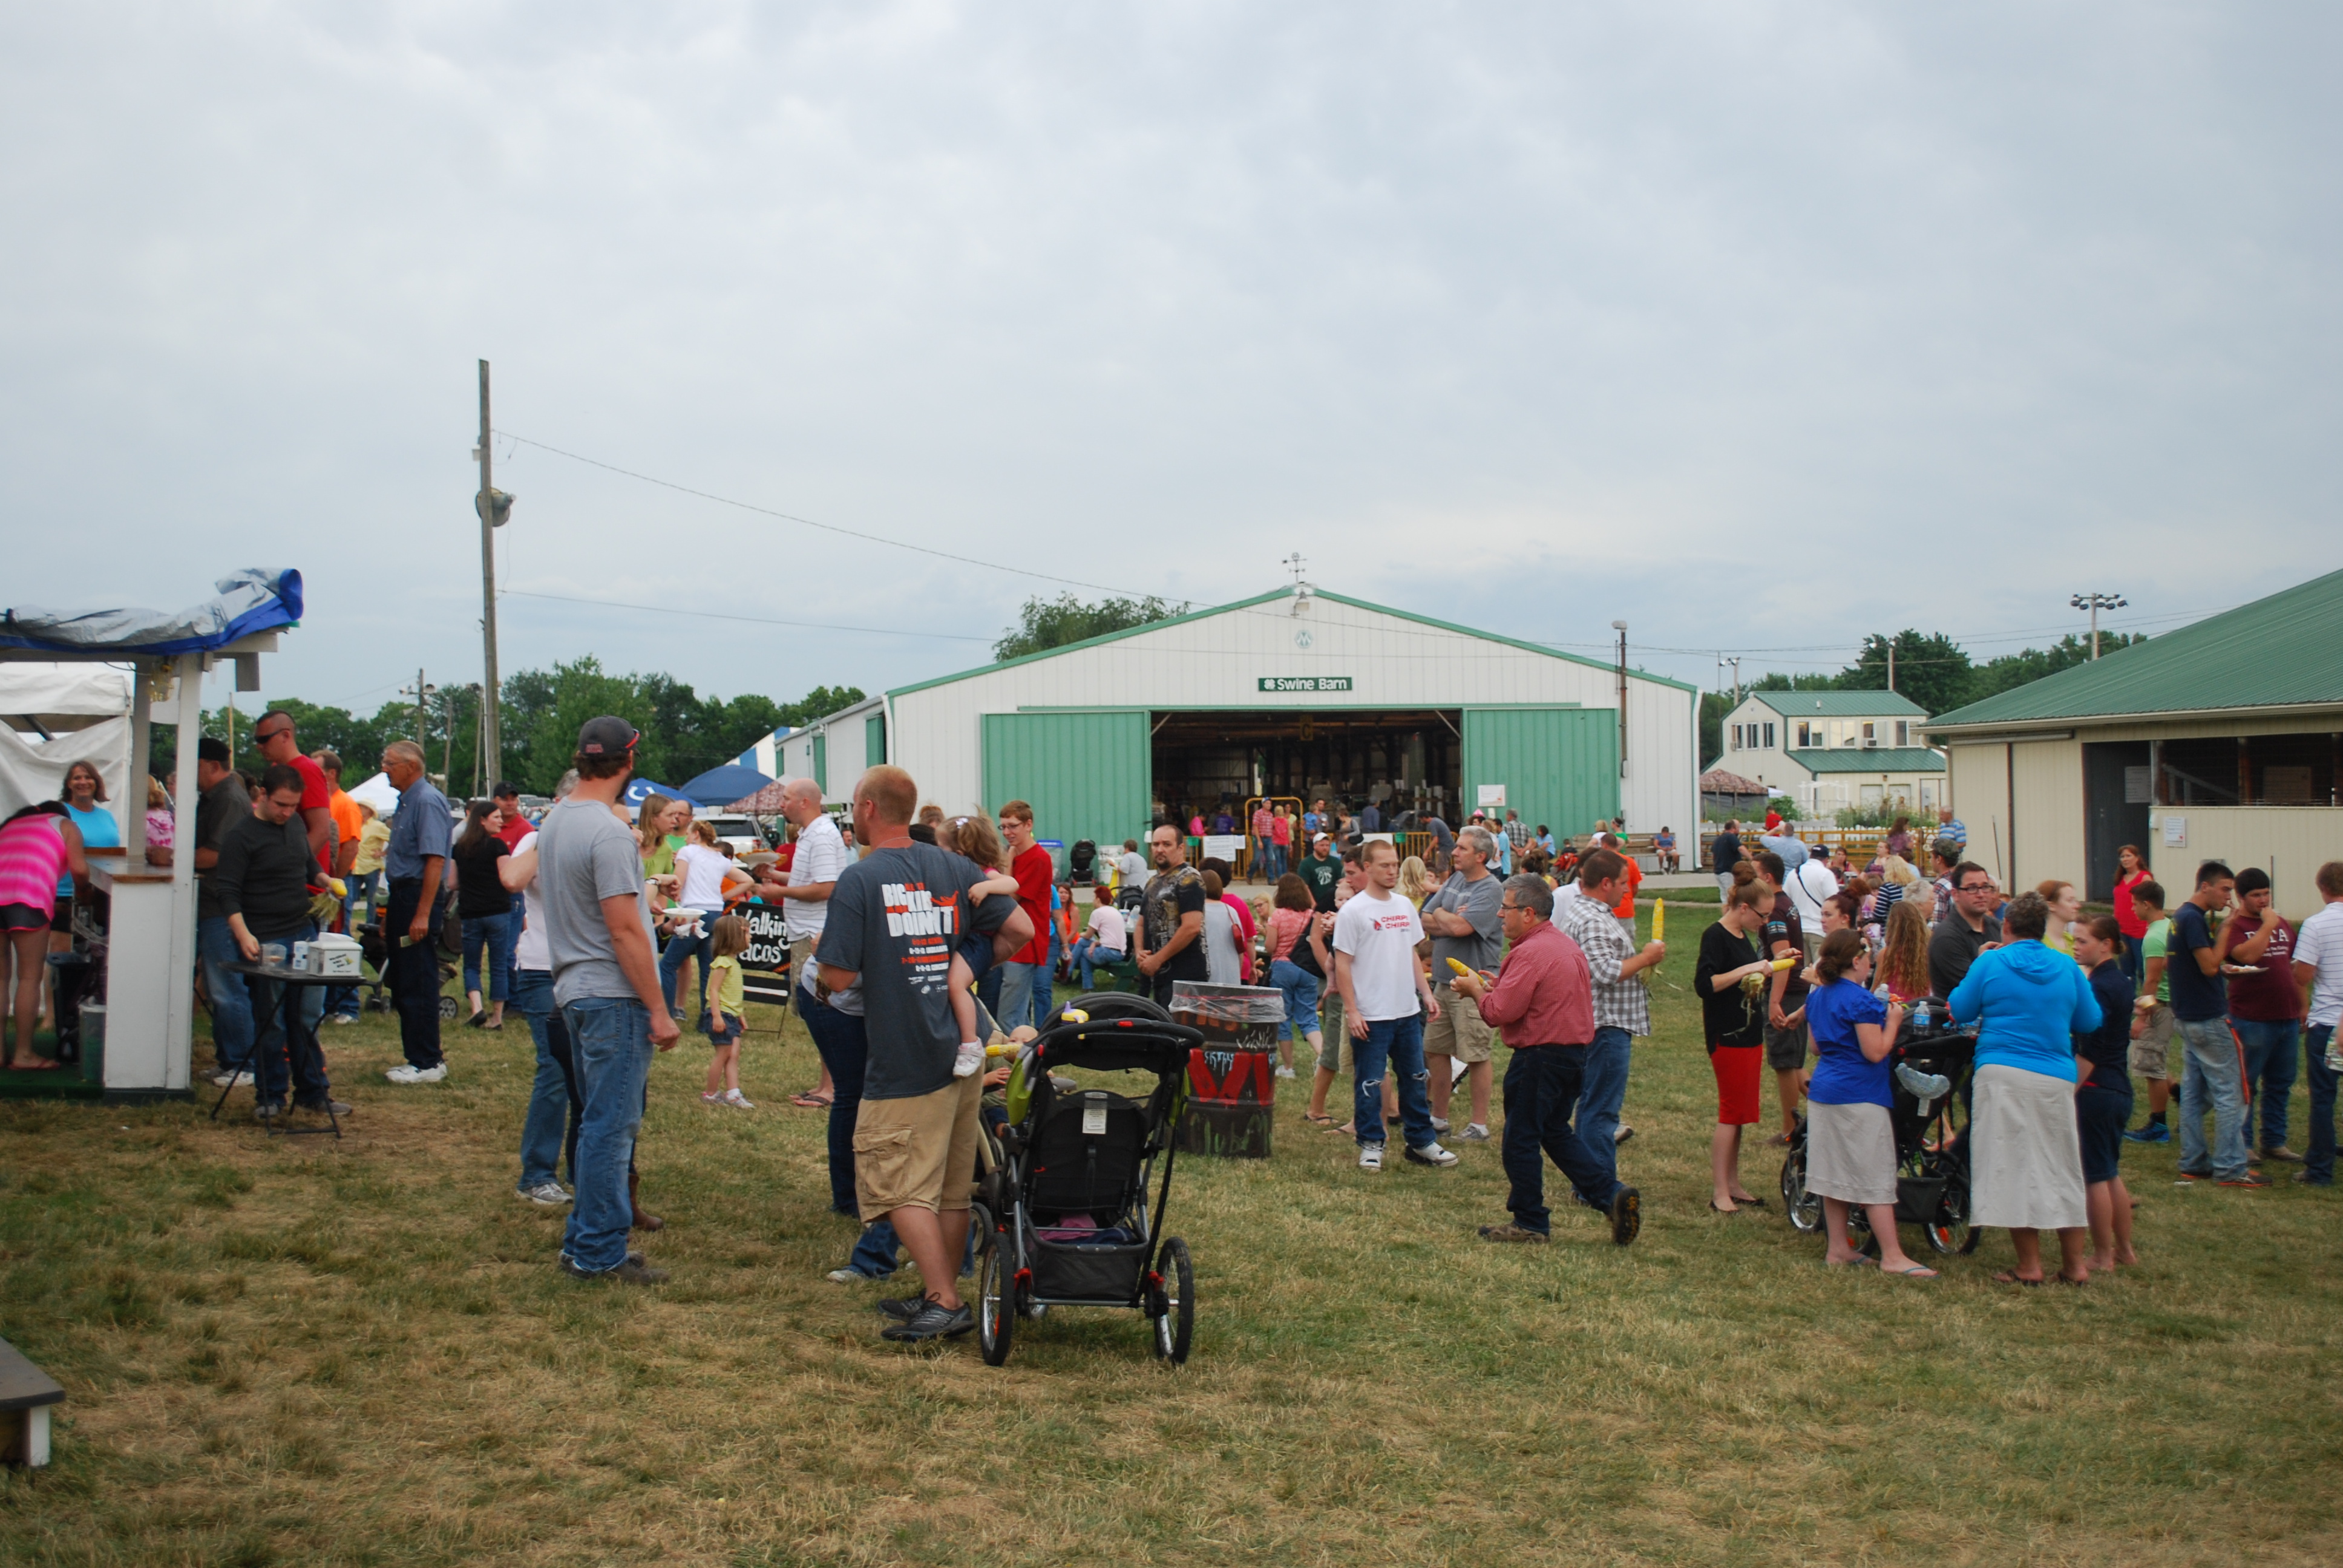 Hamilton County officials estimate that 15,000 to 20,000 people attend the annual 4-H Fair. The number is weather dependent; too hot or stormy and numbers are down. (File photo)